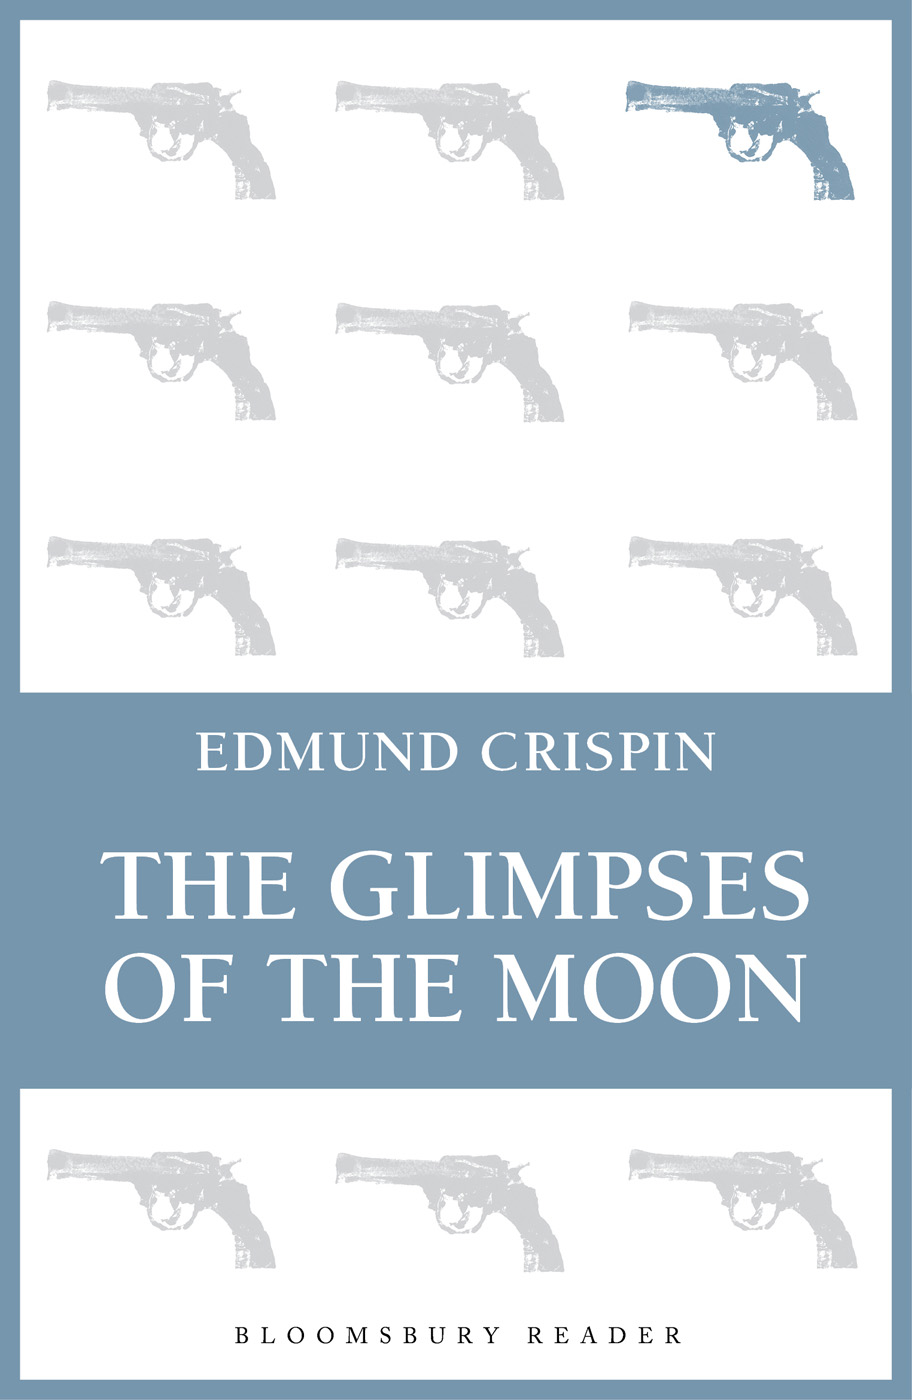 The Glimpses of the Moon (1977) by Edmund Crispin